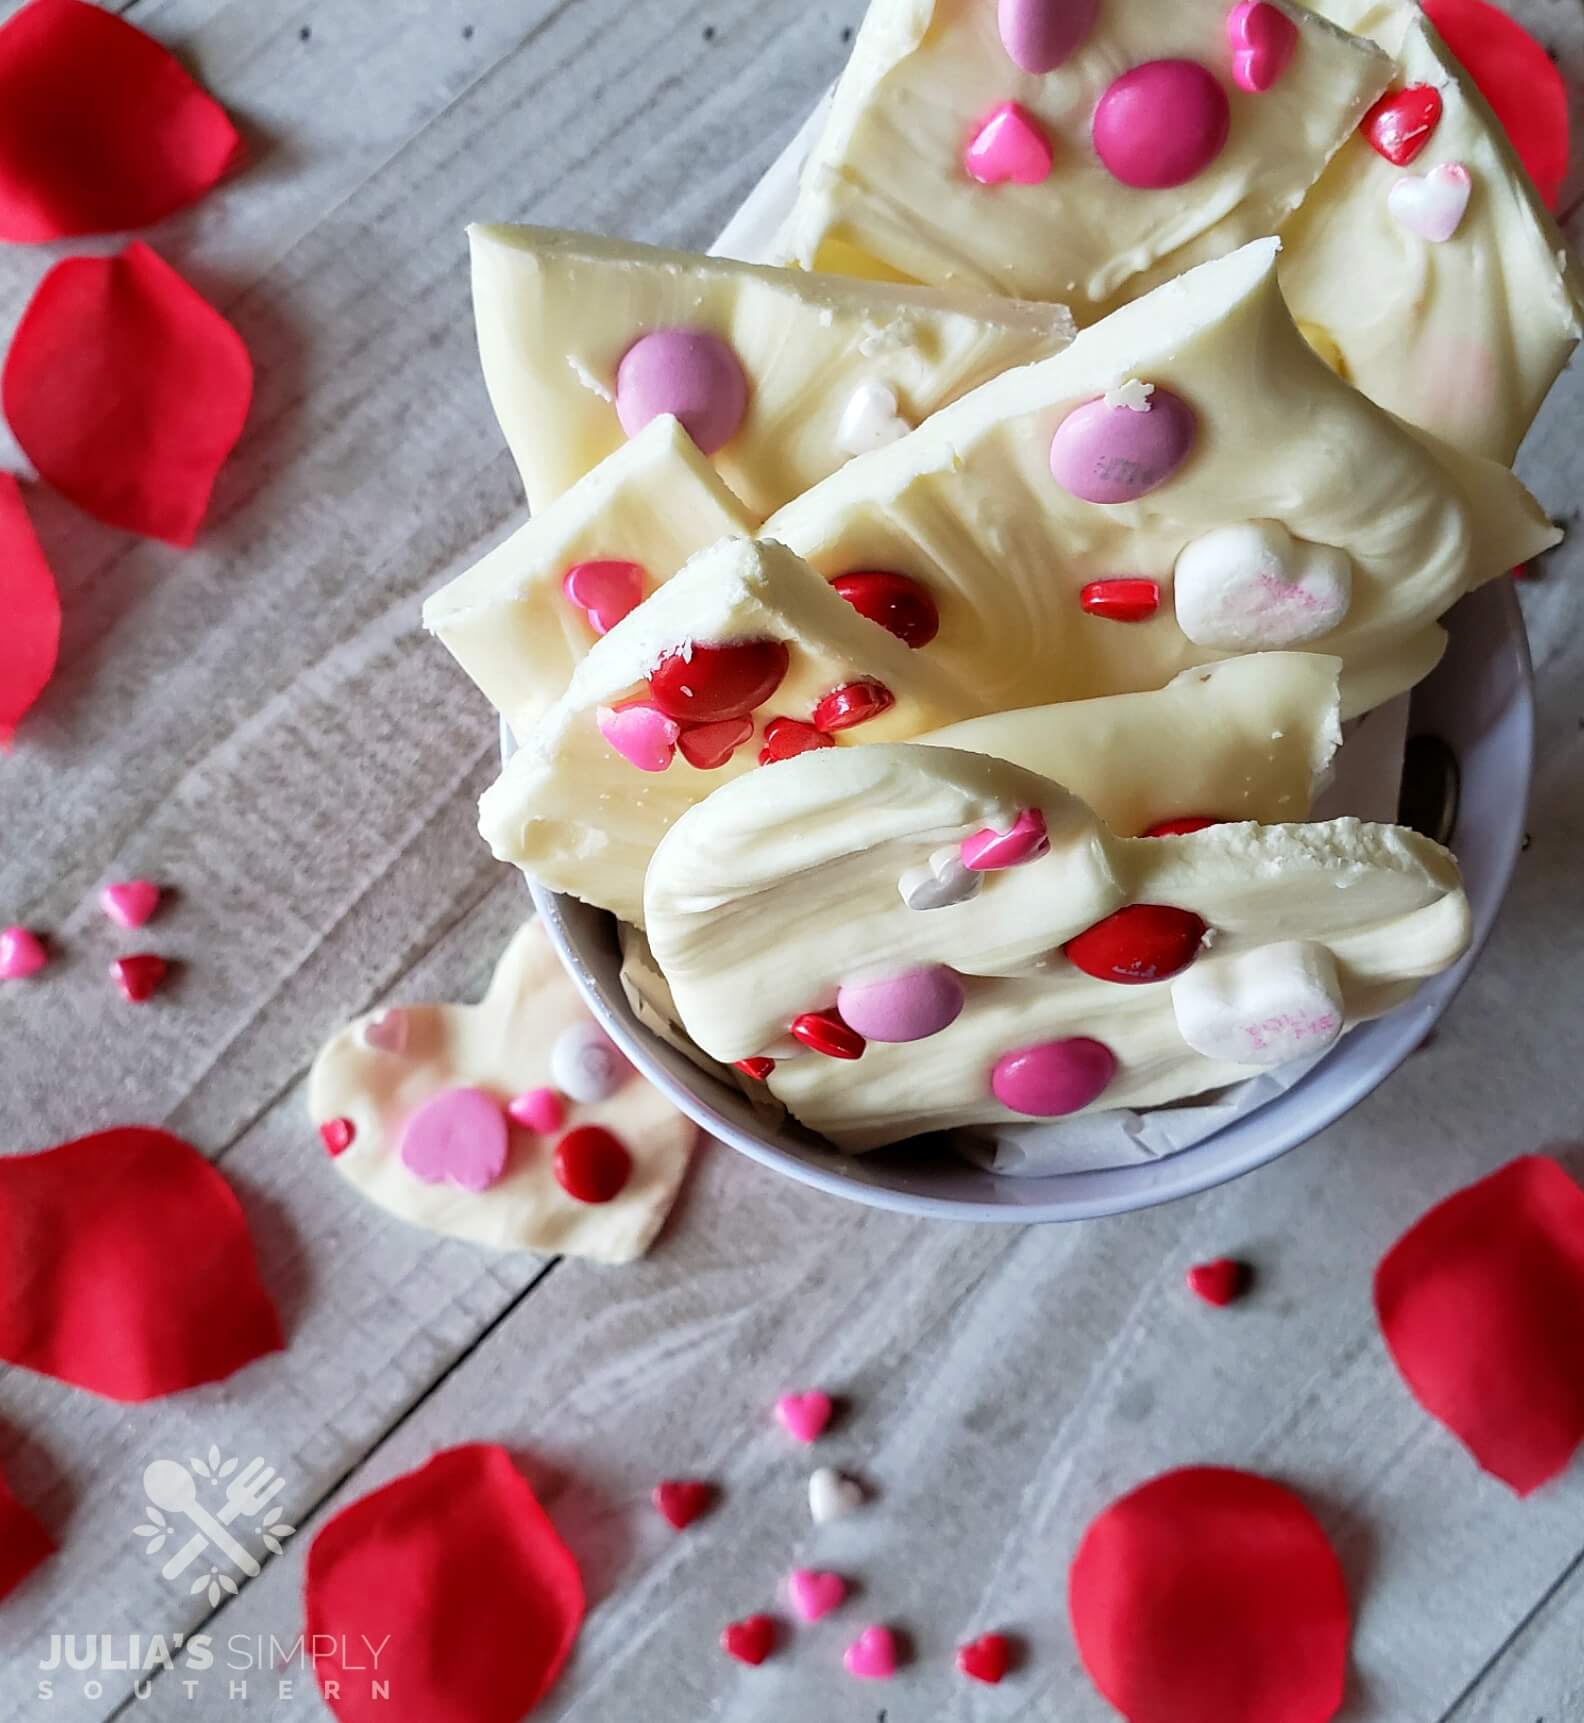 Candy bark in a Valentine's Day bucket with red rose petals